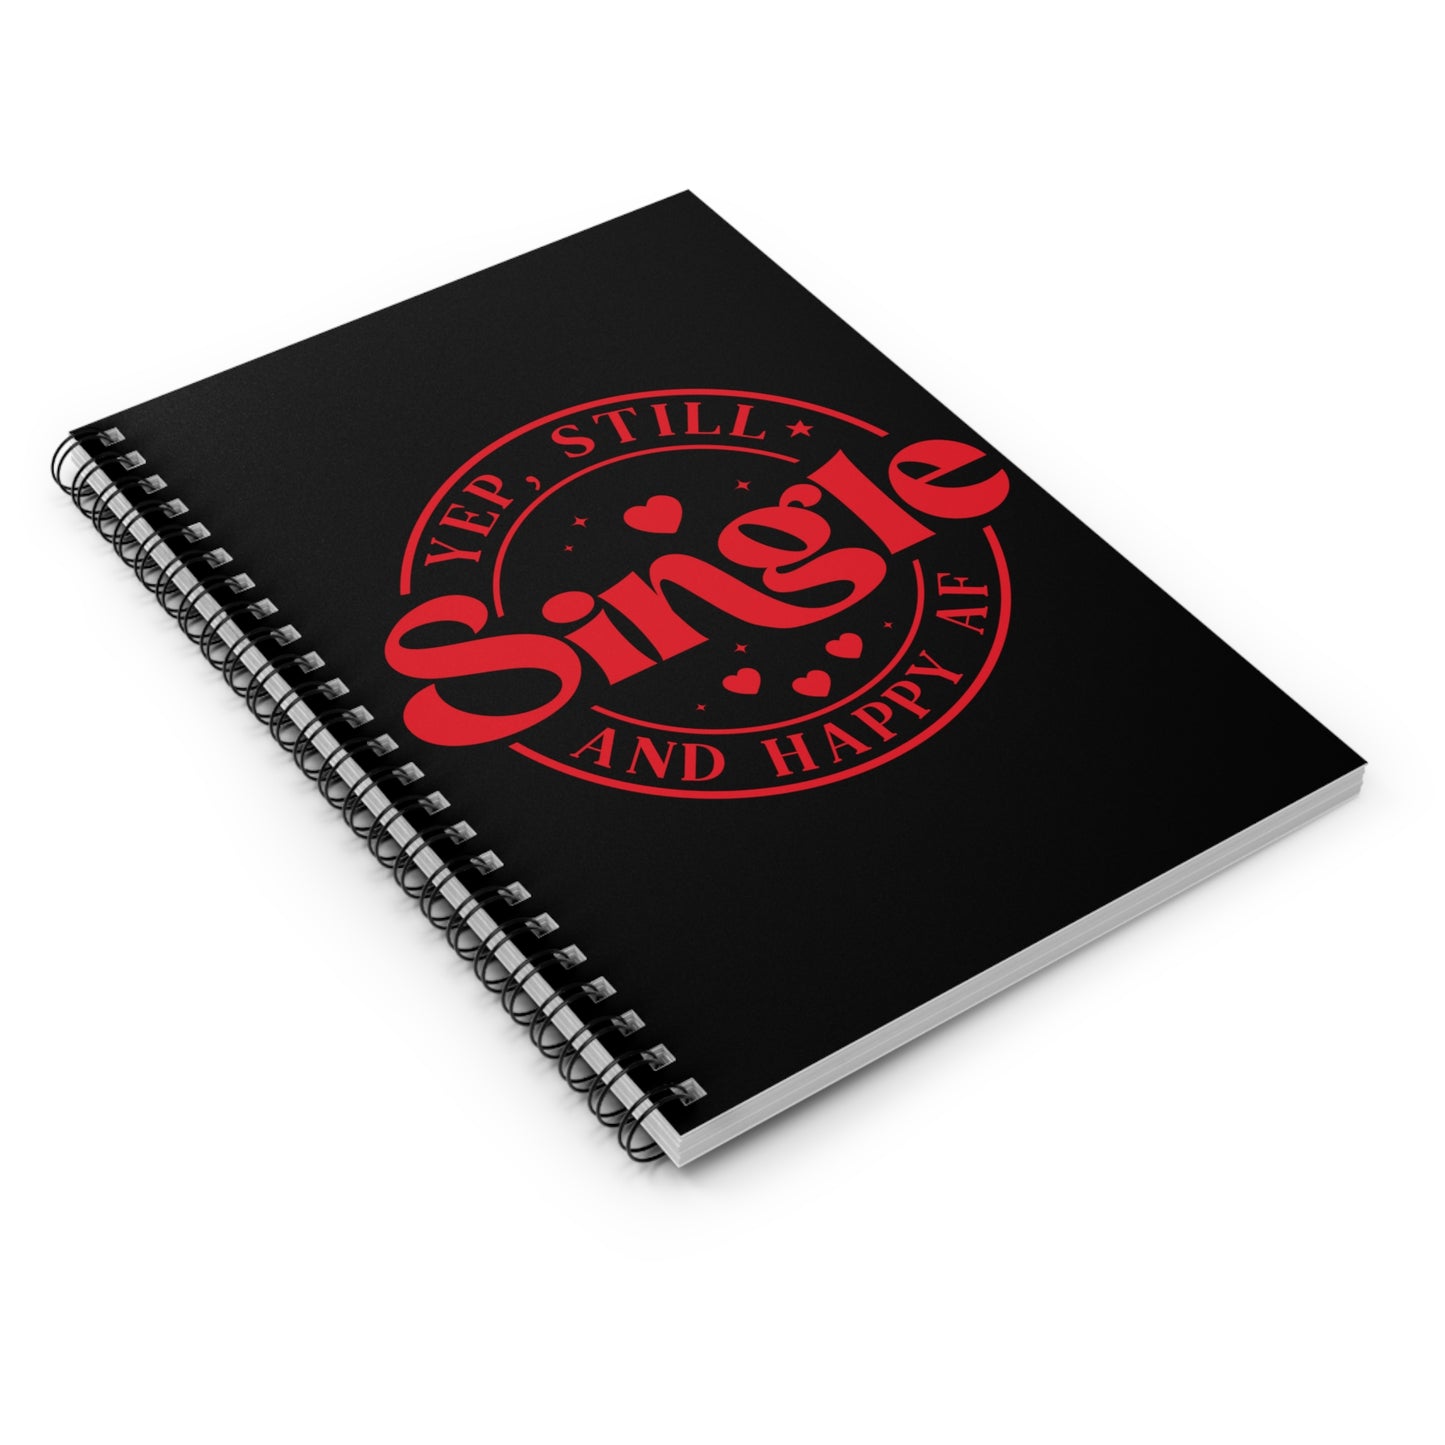 Single asf Spiral Notebook - Ruled Line